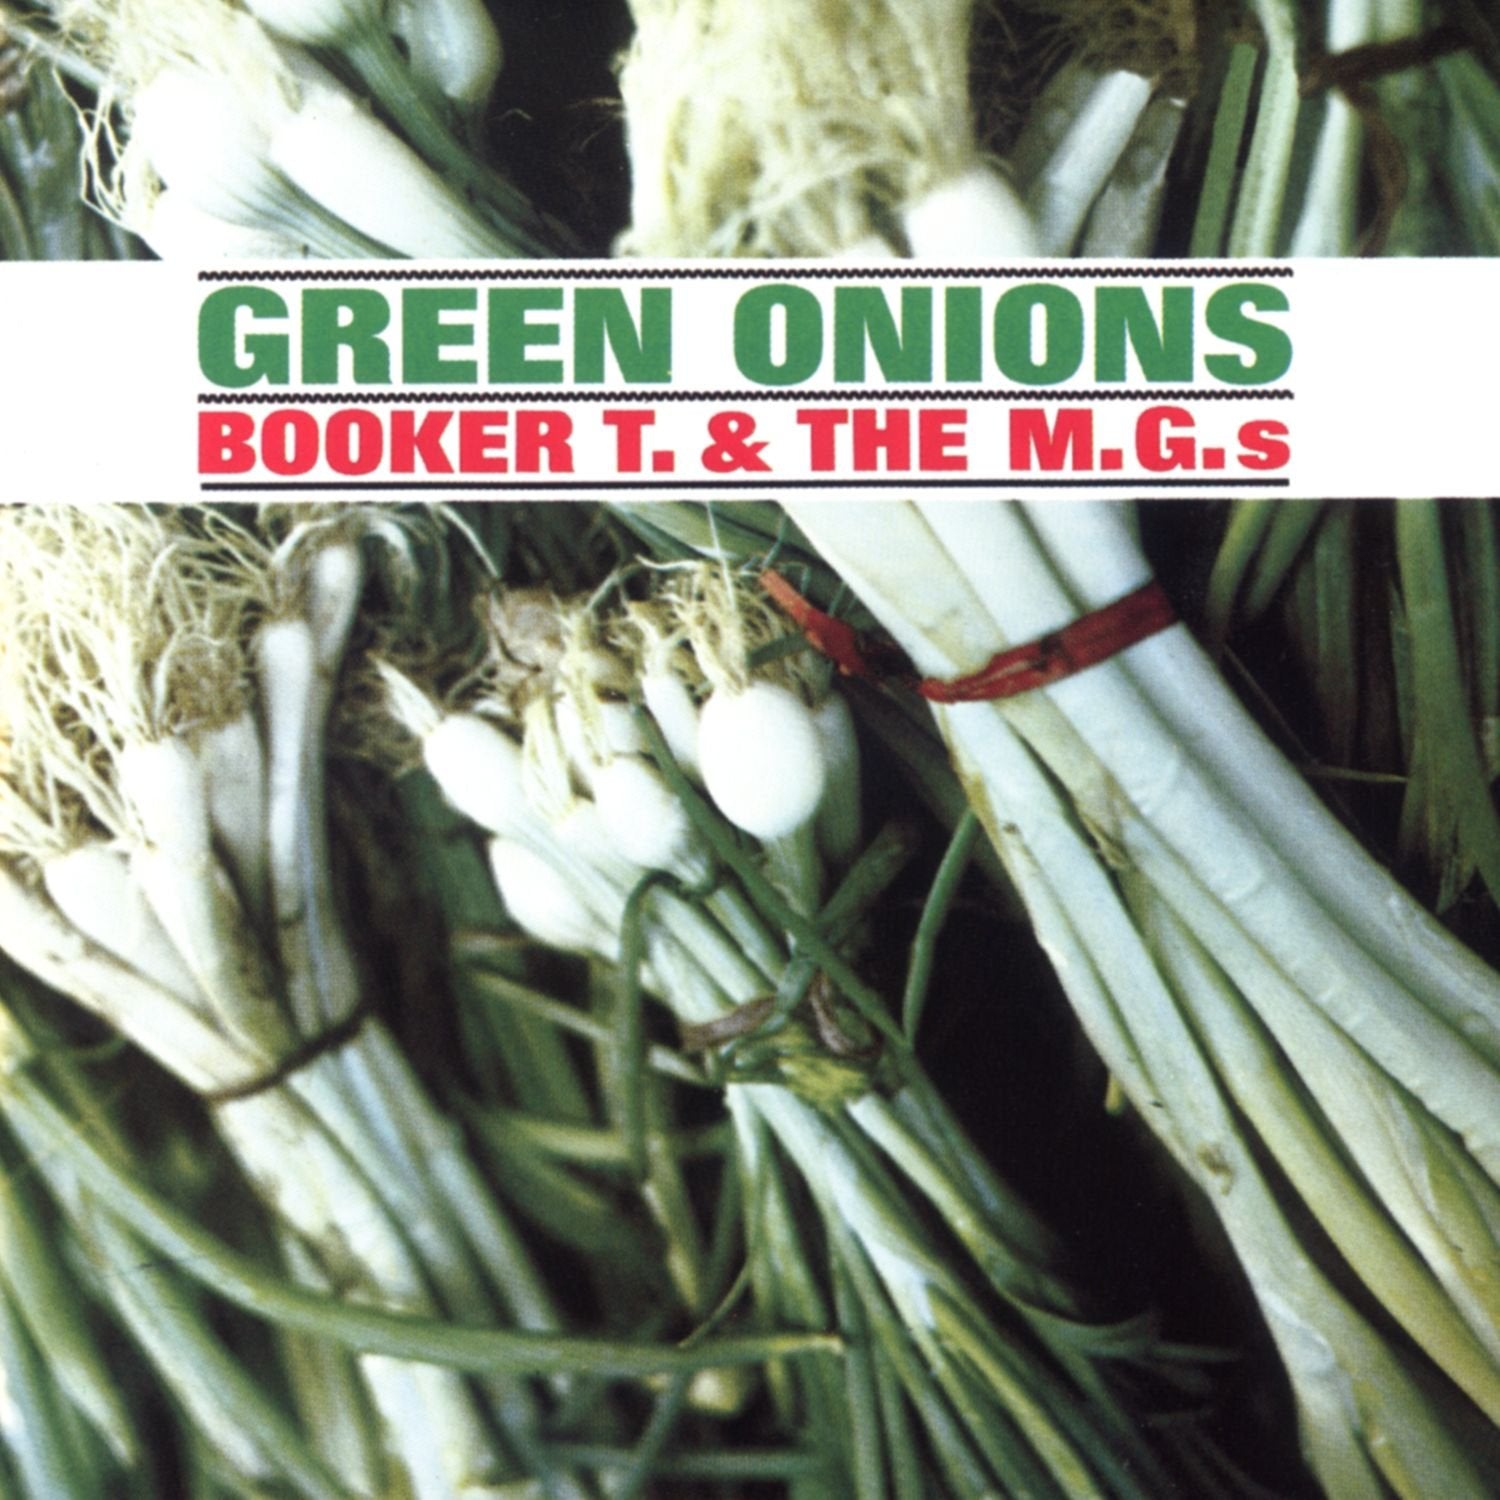 BOOKER T. & THE MG's – Green Onions